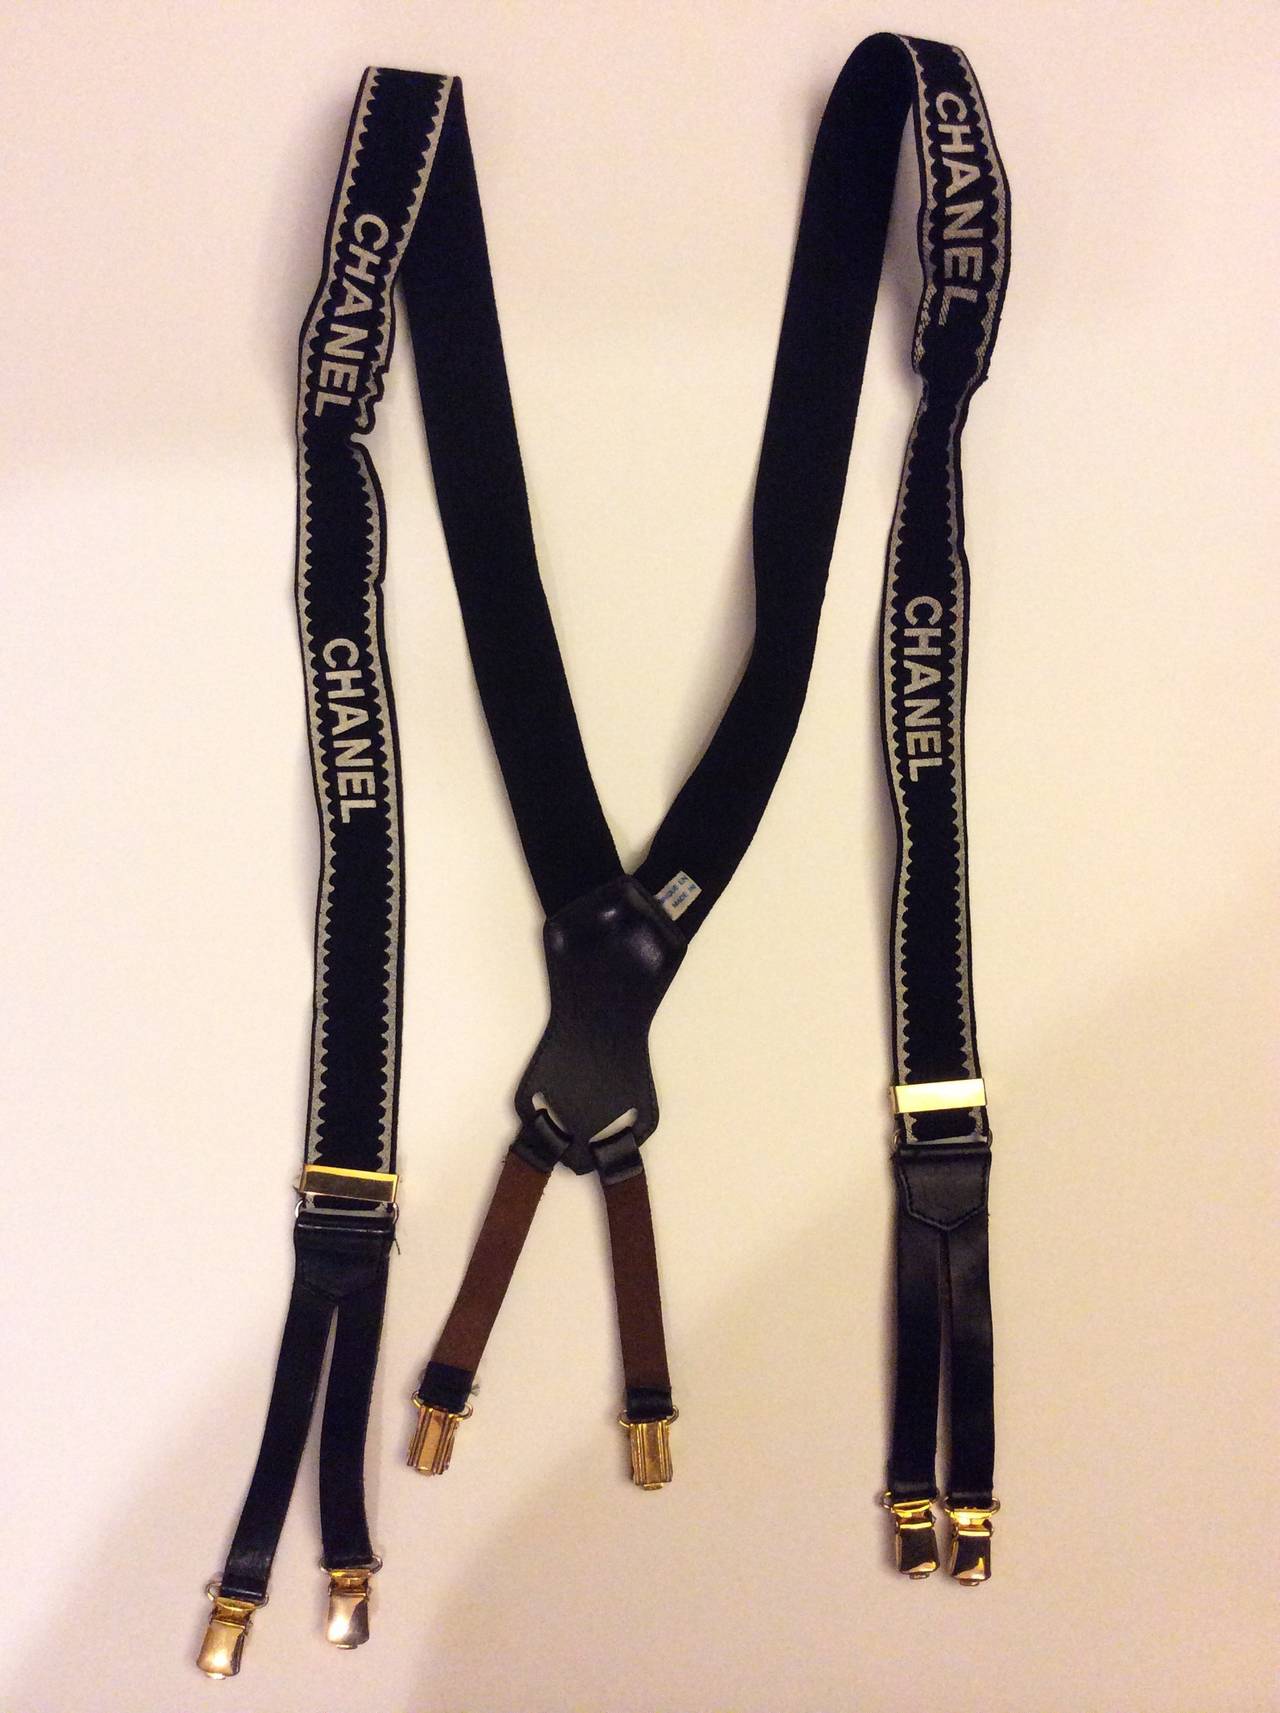 These are a rare iconic Chanel suspenders with elastic and leather straps with gold metal clips. Made in France. Adjustable length.